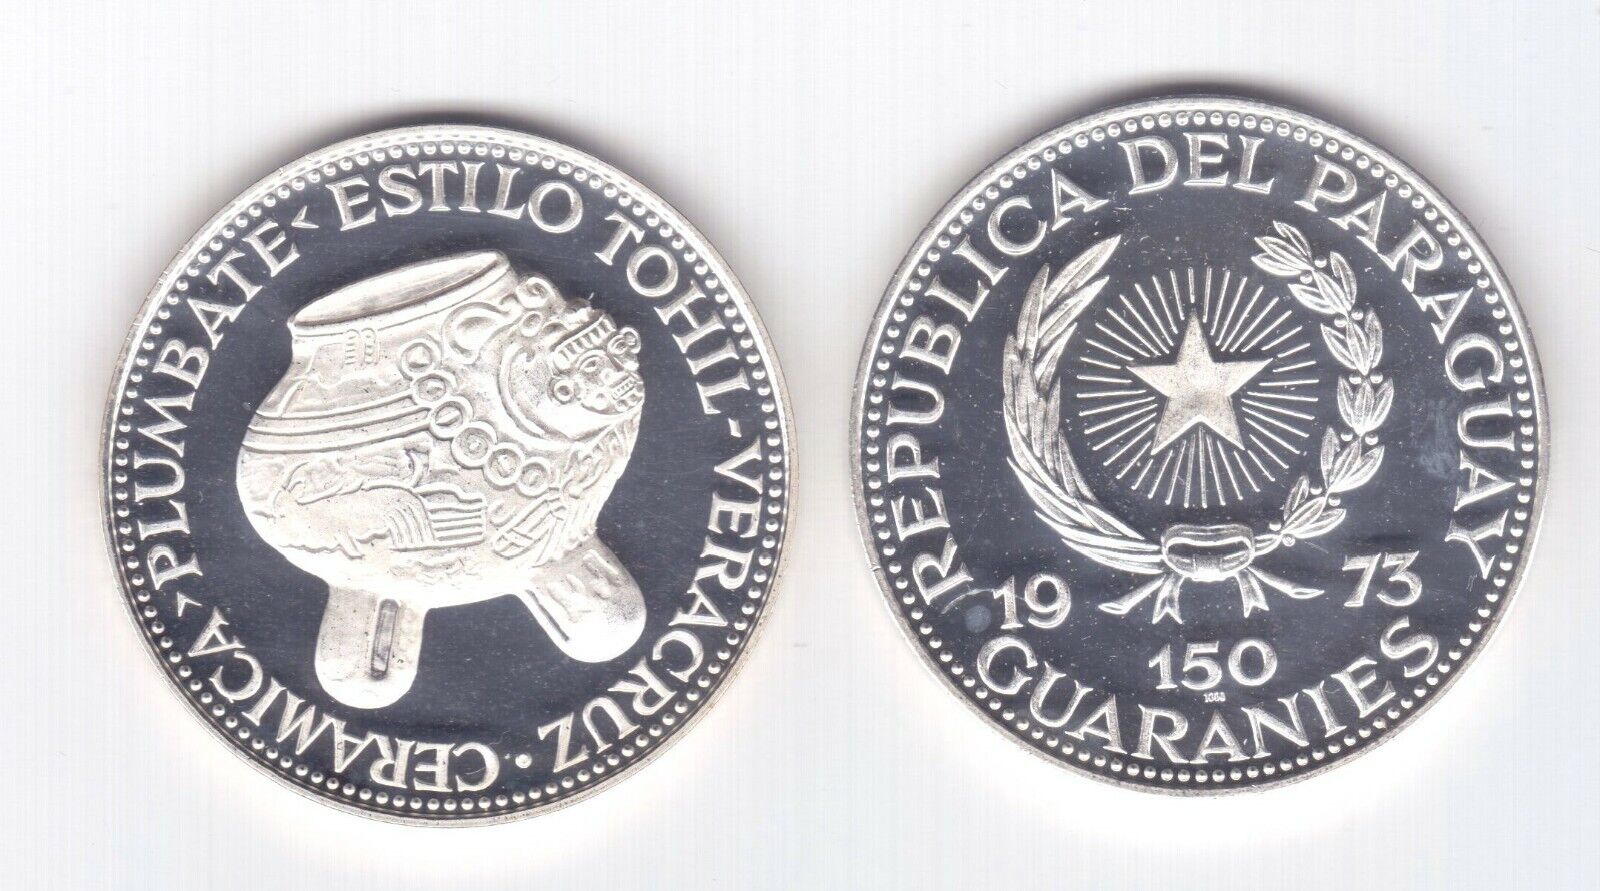 Paraguay Rare 150 Guaranies Silver Proof Coin 1973 Year Km#66 Vase